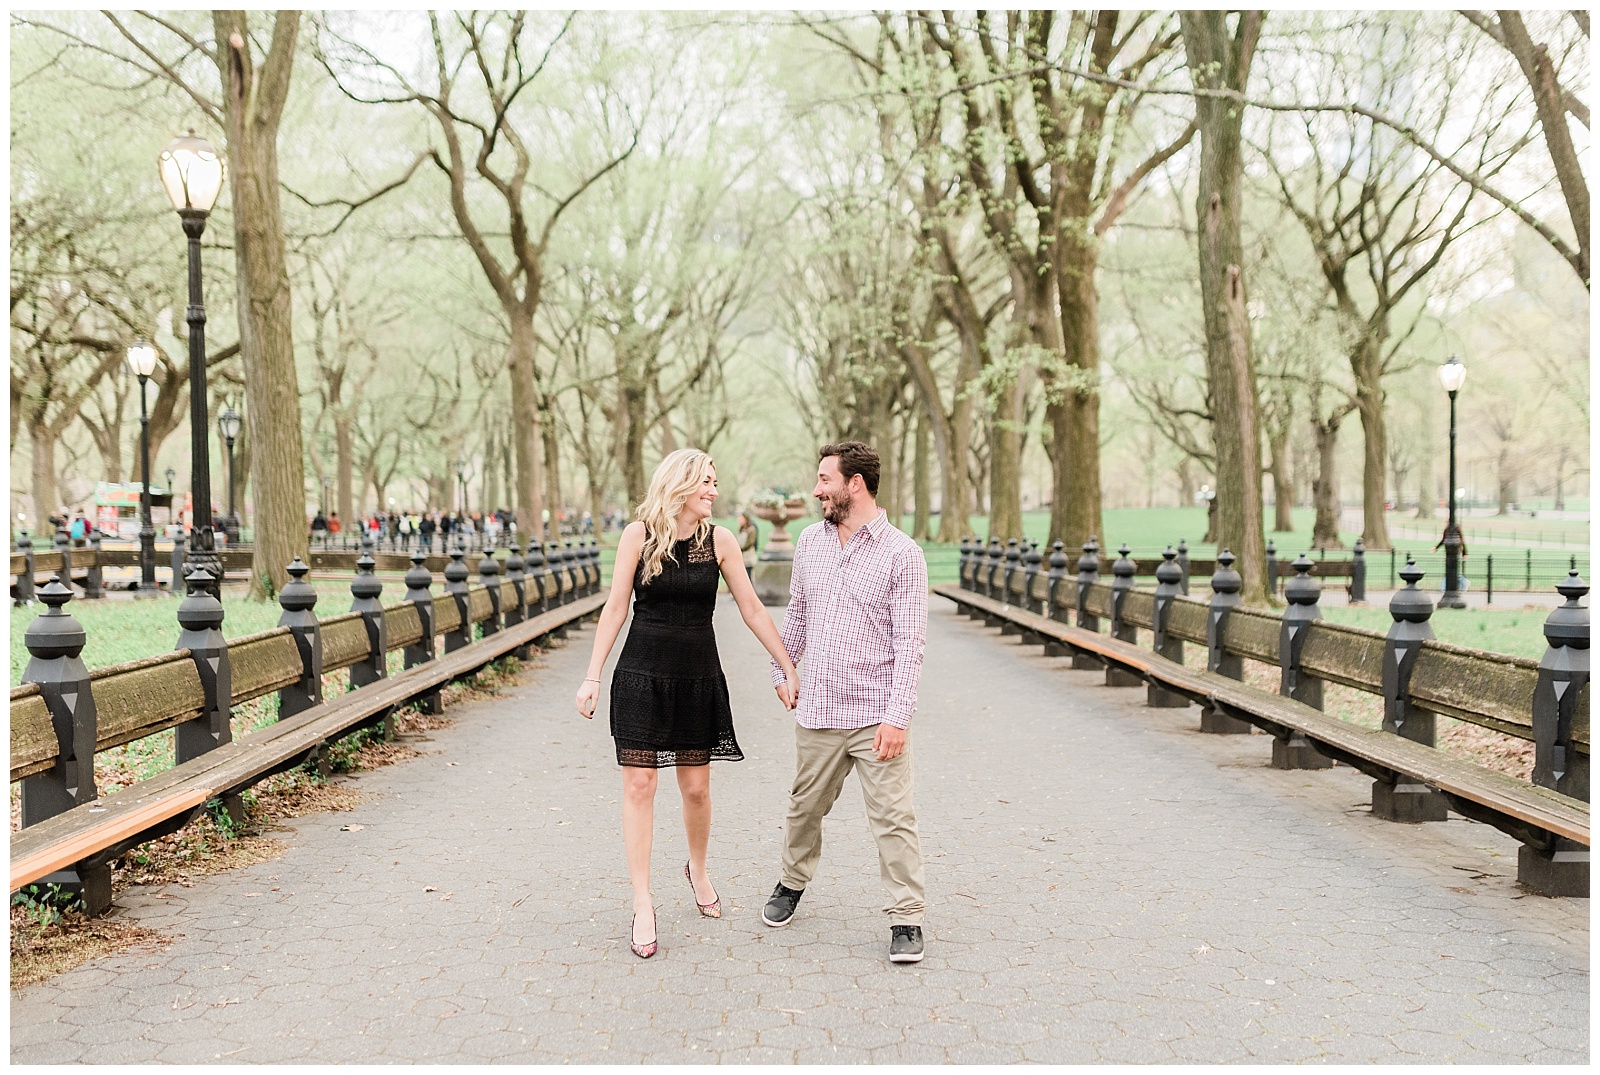 A couple walks holding hands at the Mall in Central Park.